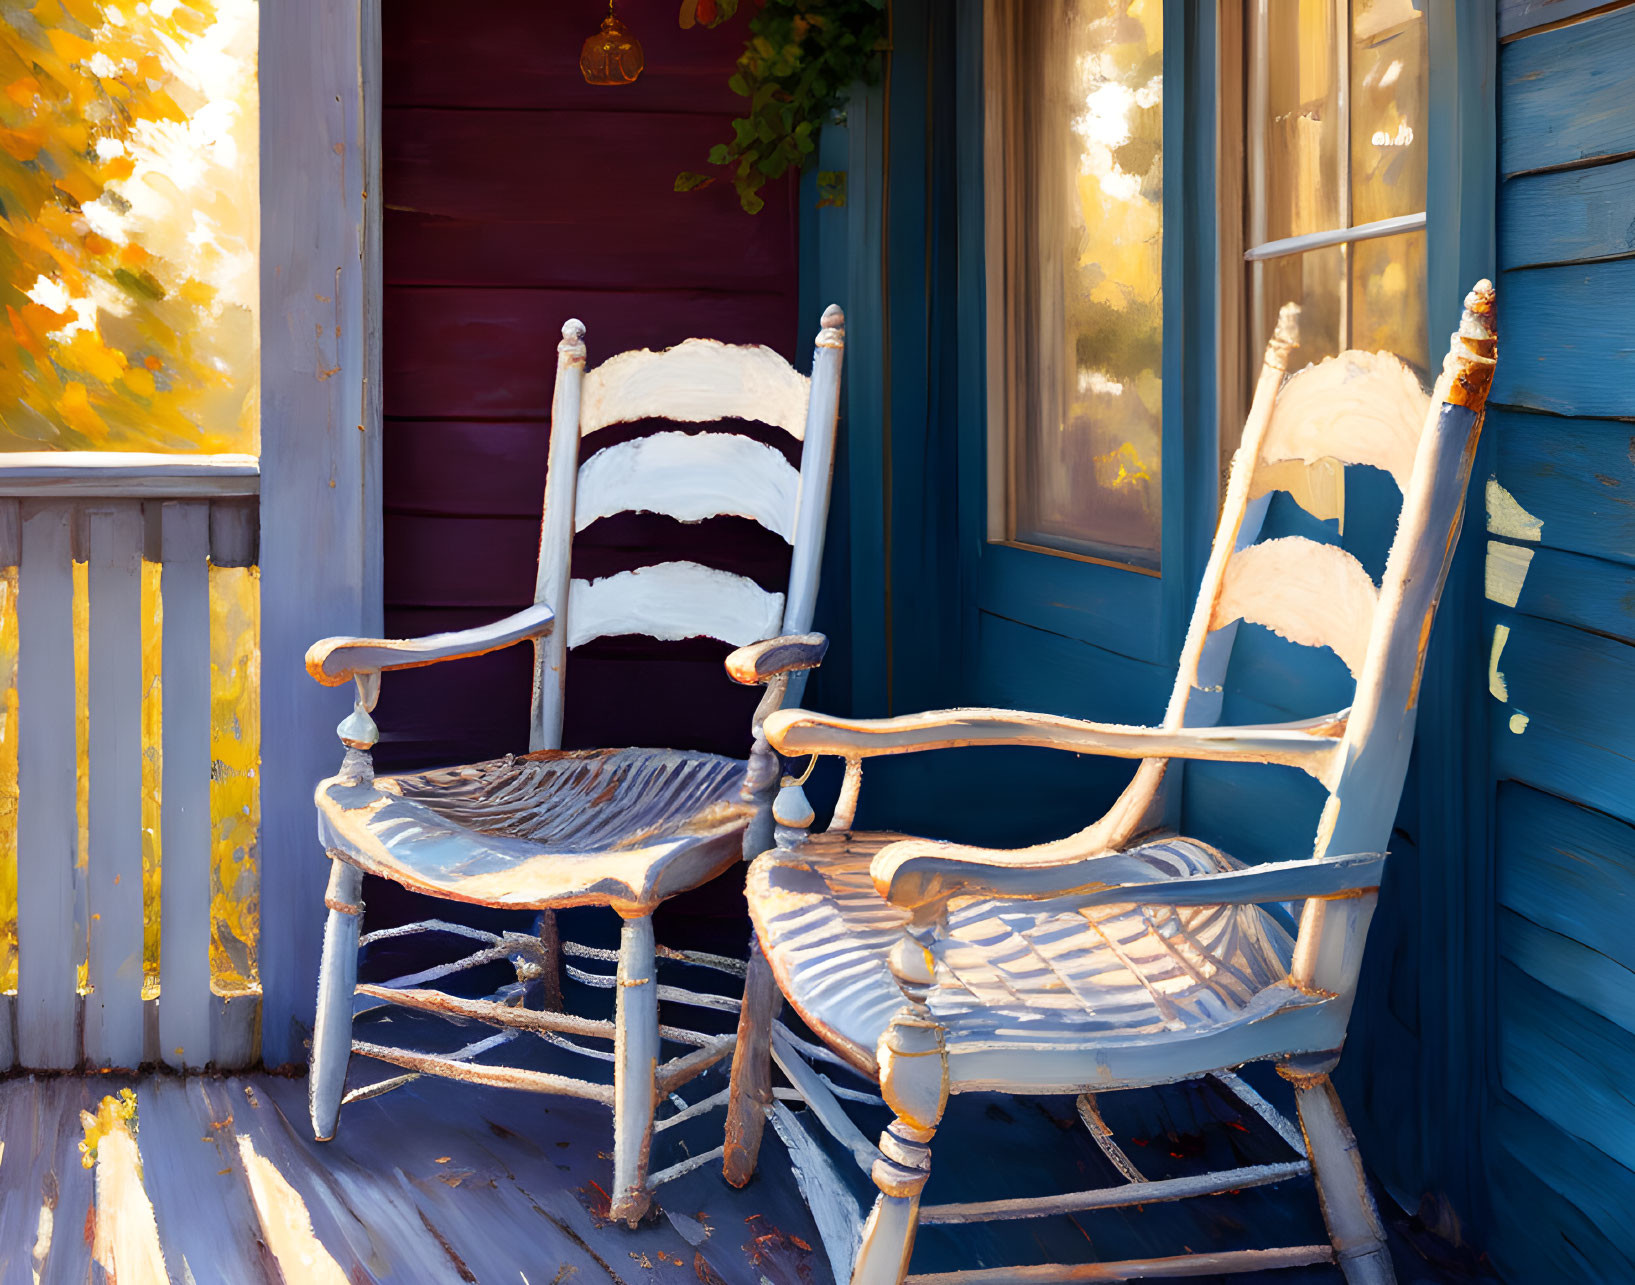 Rustic wooden rocking chairs on sunny porch near blue wall and window